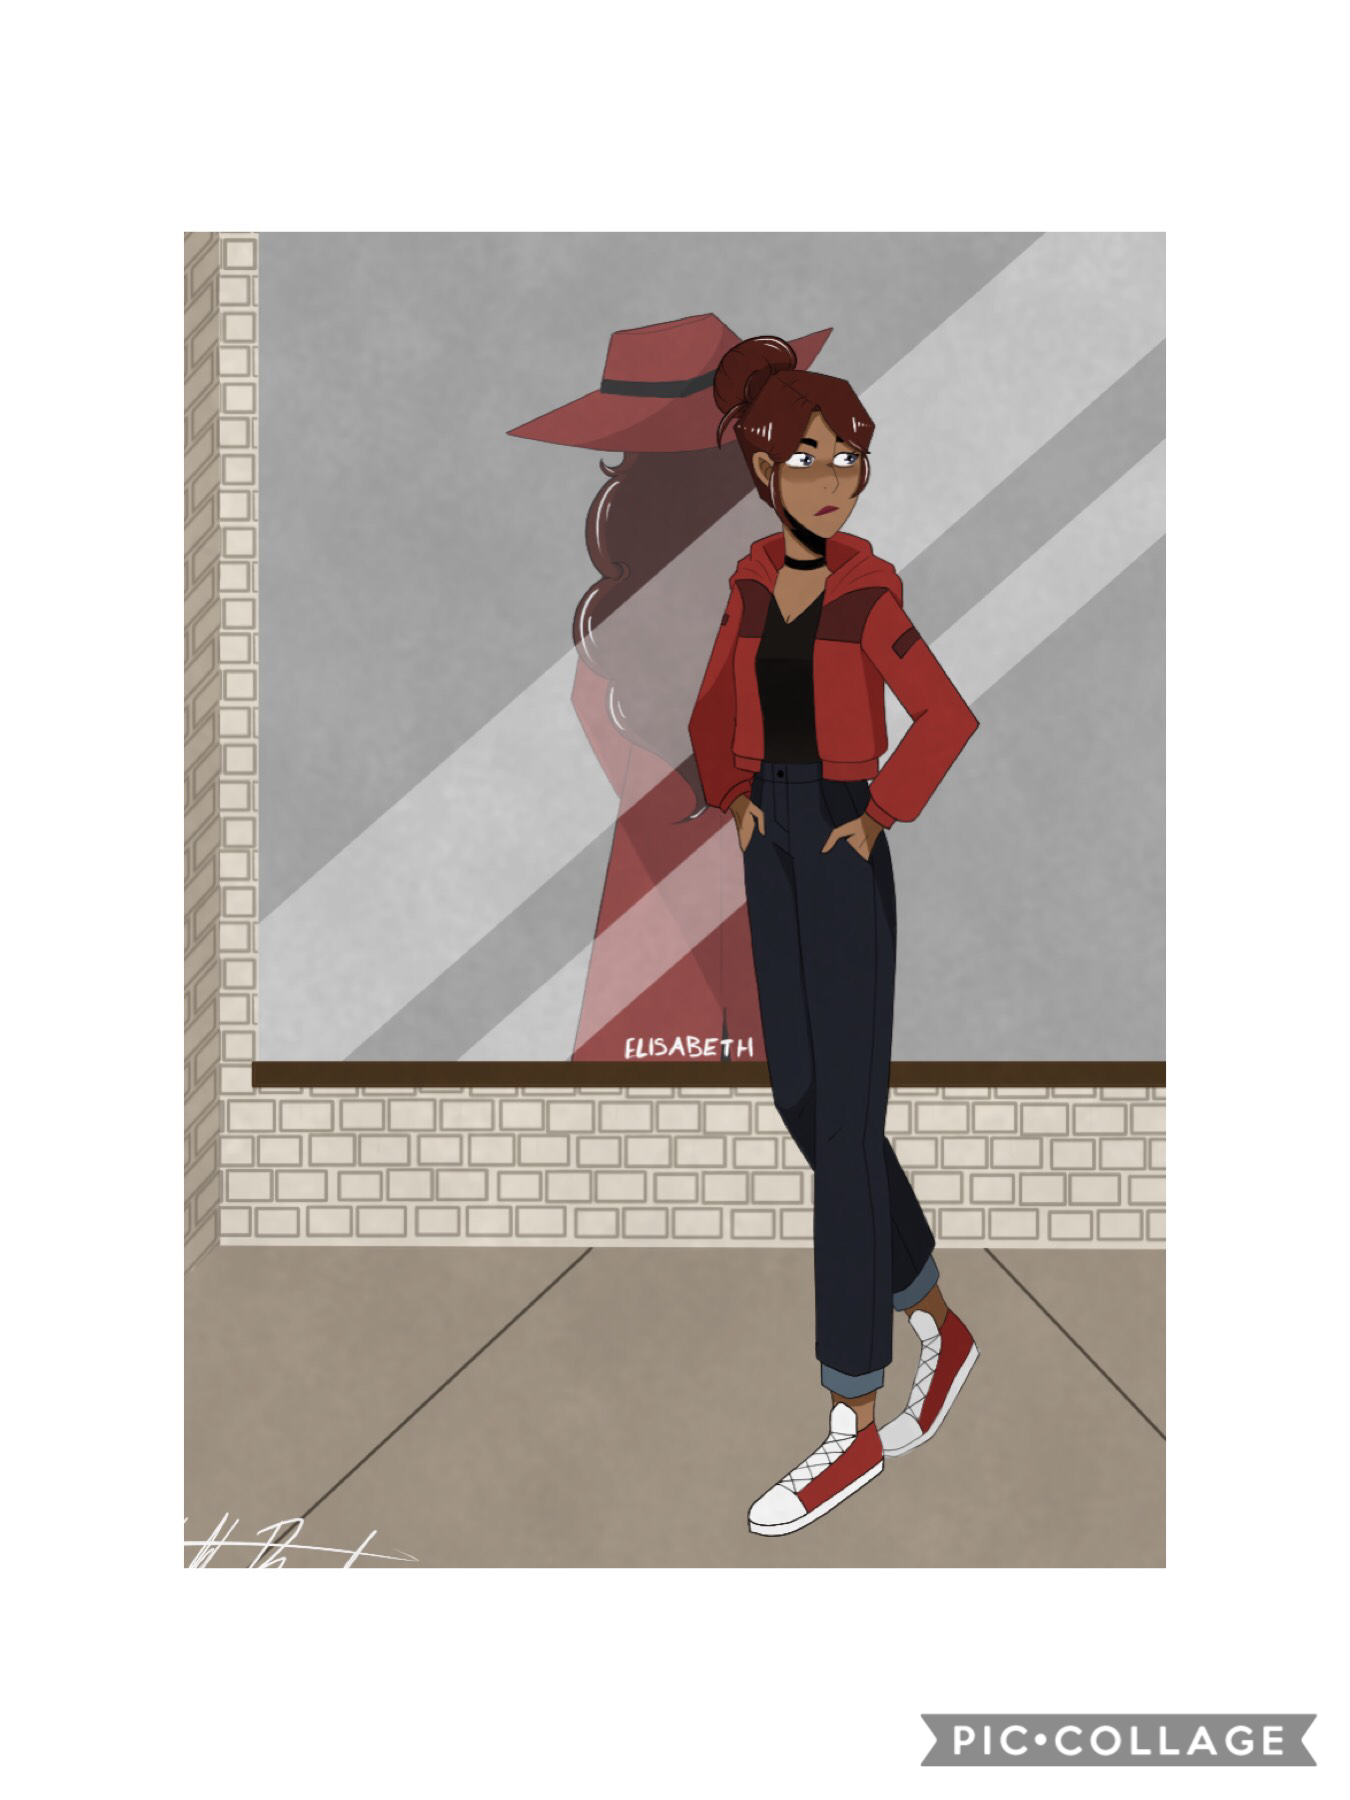 tap tap

and the quality has once again been ruined by PicCollage but here's a quick Carmen Sandiego drwing